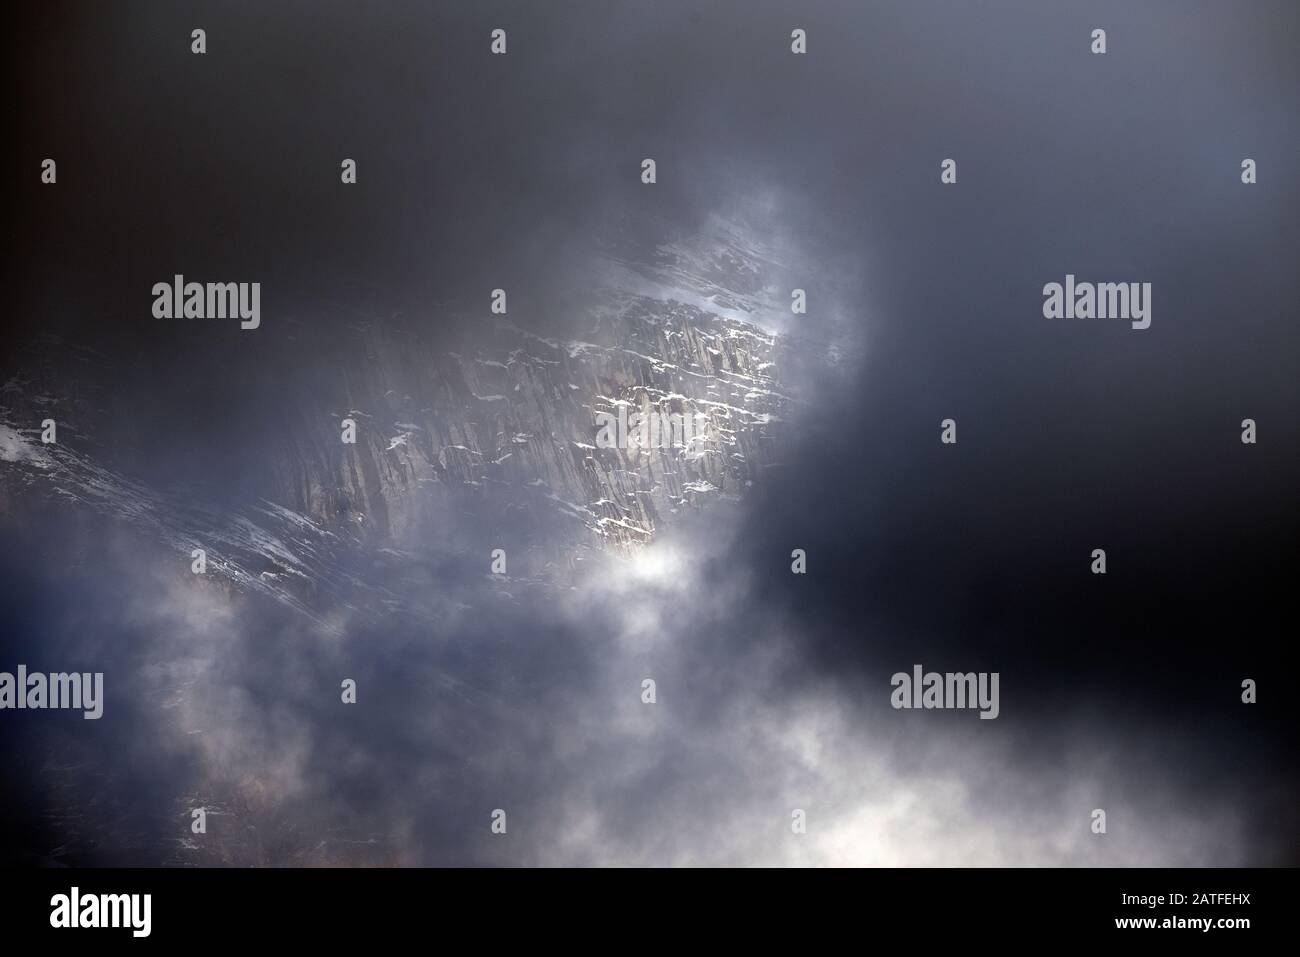 France, Haute-Savoie (74), Passy, Alps, Chain of Fiz with fog before the storm Stock Photo